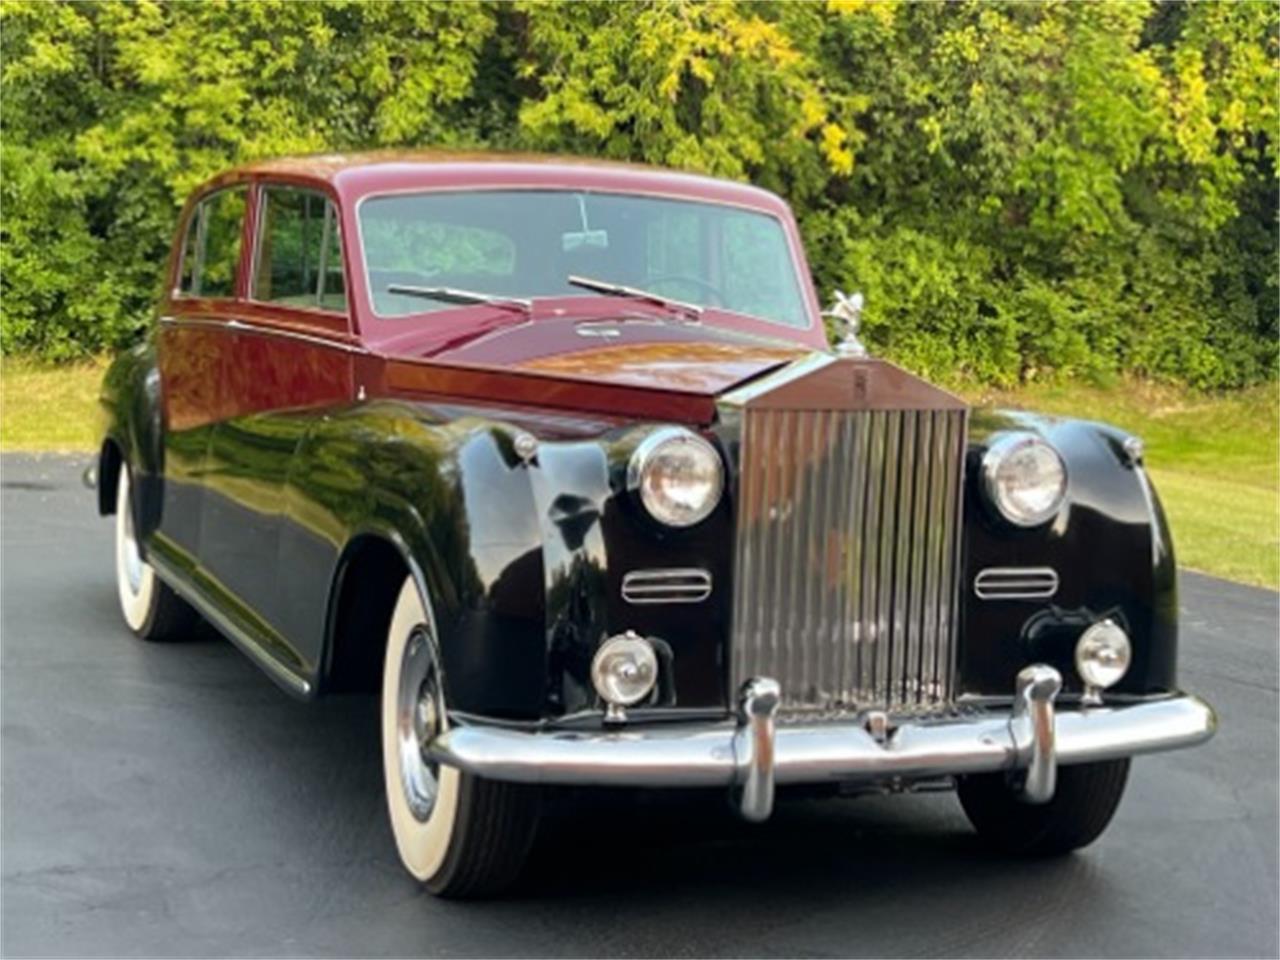 For Sale: 1957 Rolls-Royce Silver Wraith in Astoria, New York for sale in Astoria, NY